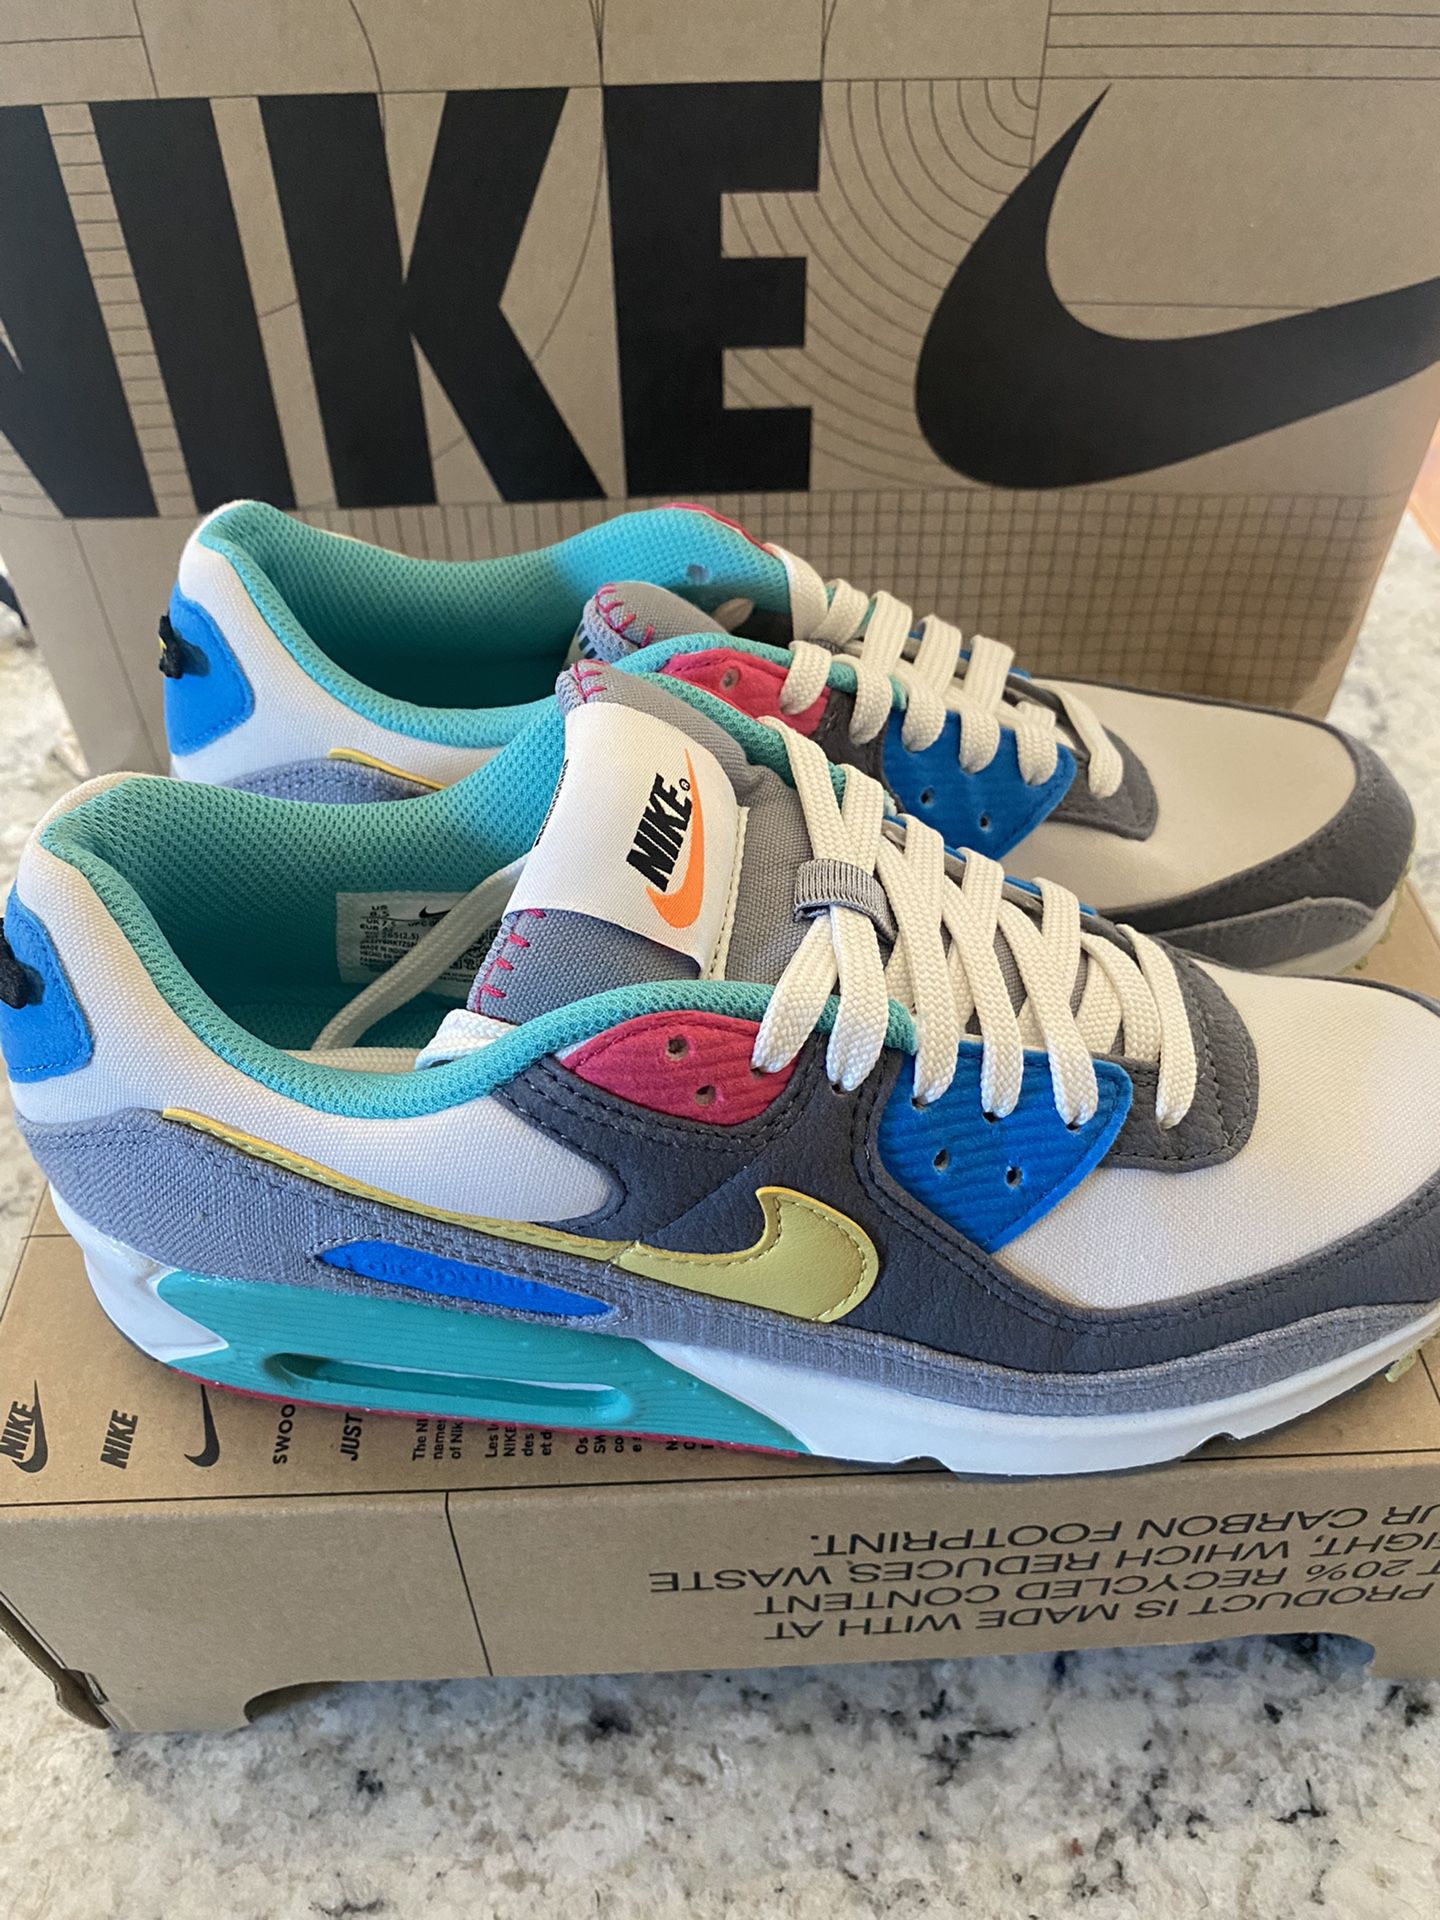 Air Max 90 'Air Sprung' Iron Sale in Tacoma, WA - OfferUp